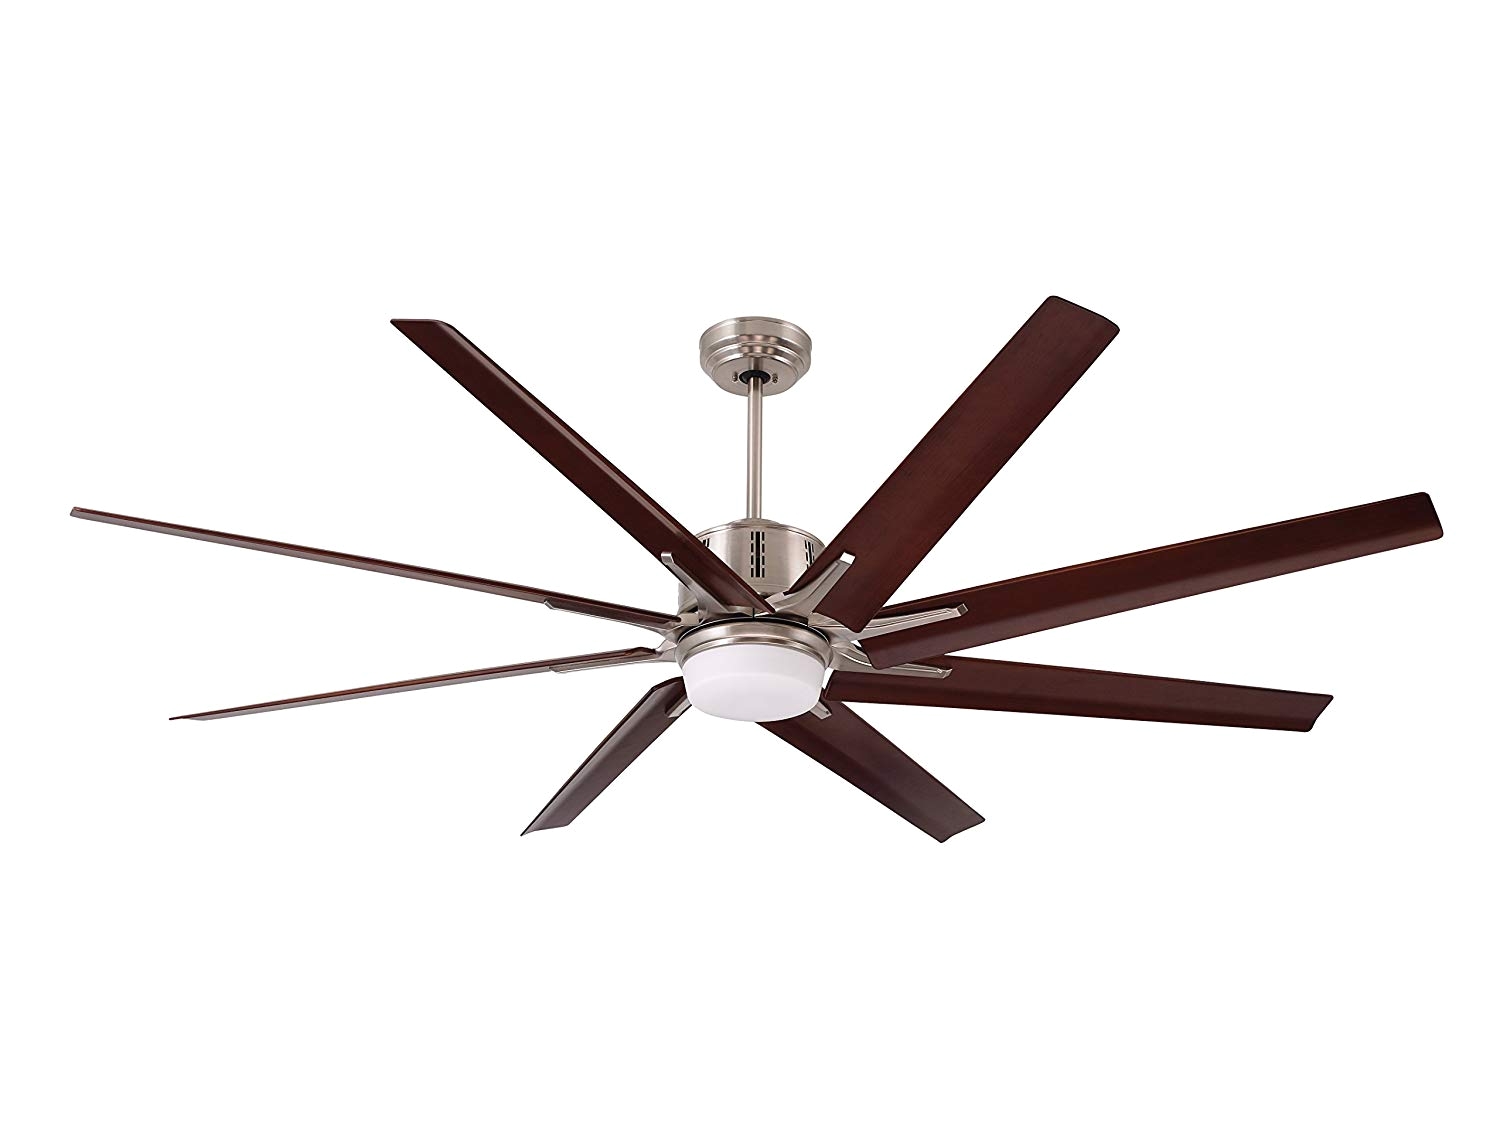 emerson cf985lbs aira eco 72 inch modern ceiling fan 8 blade ceiling fan with led lighting and 6 speed wall control amazon com